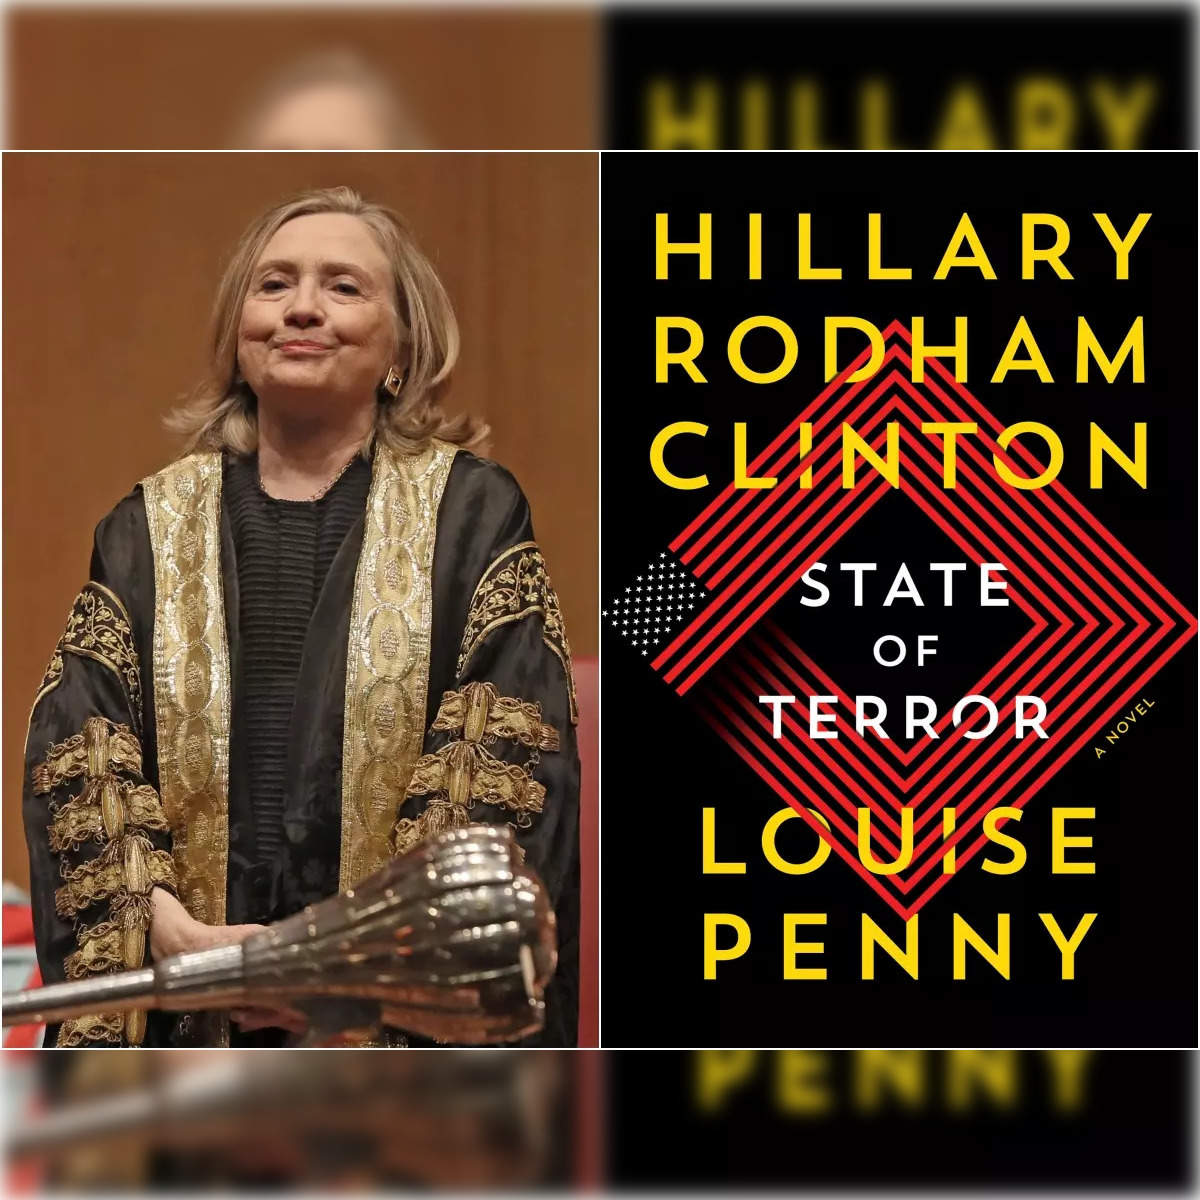 See cover of Hillary Clinton and Louise Penny's State of Terror